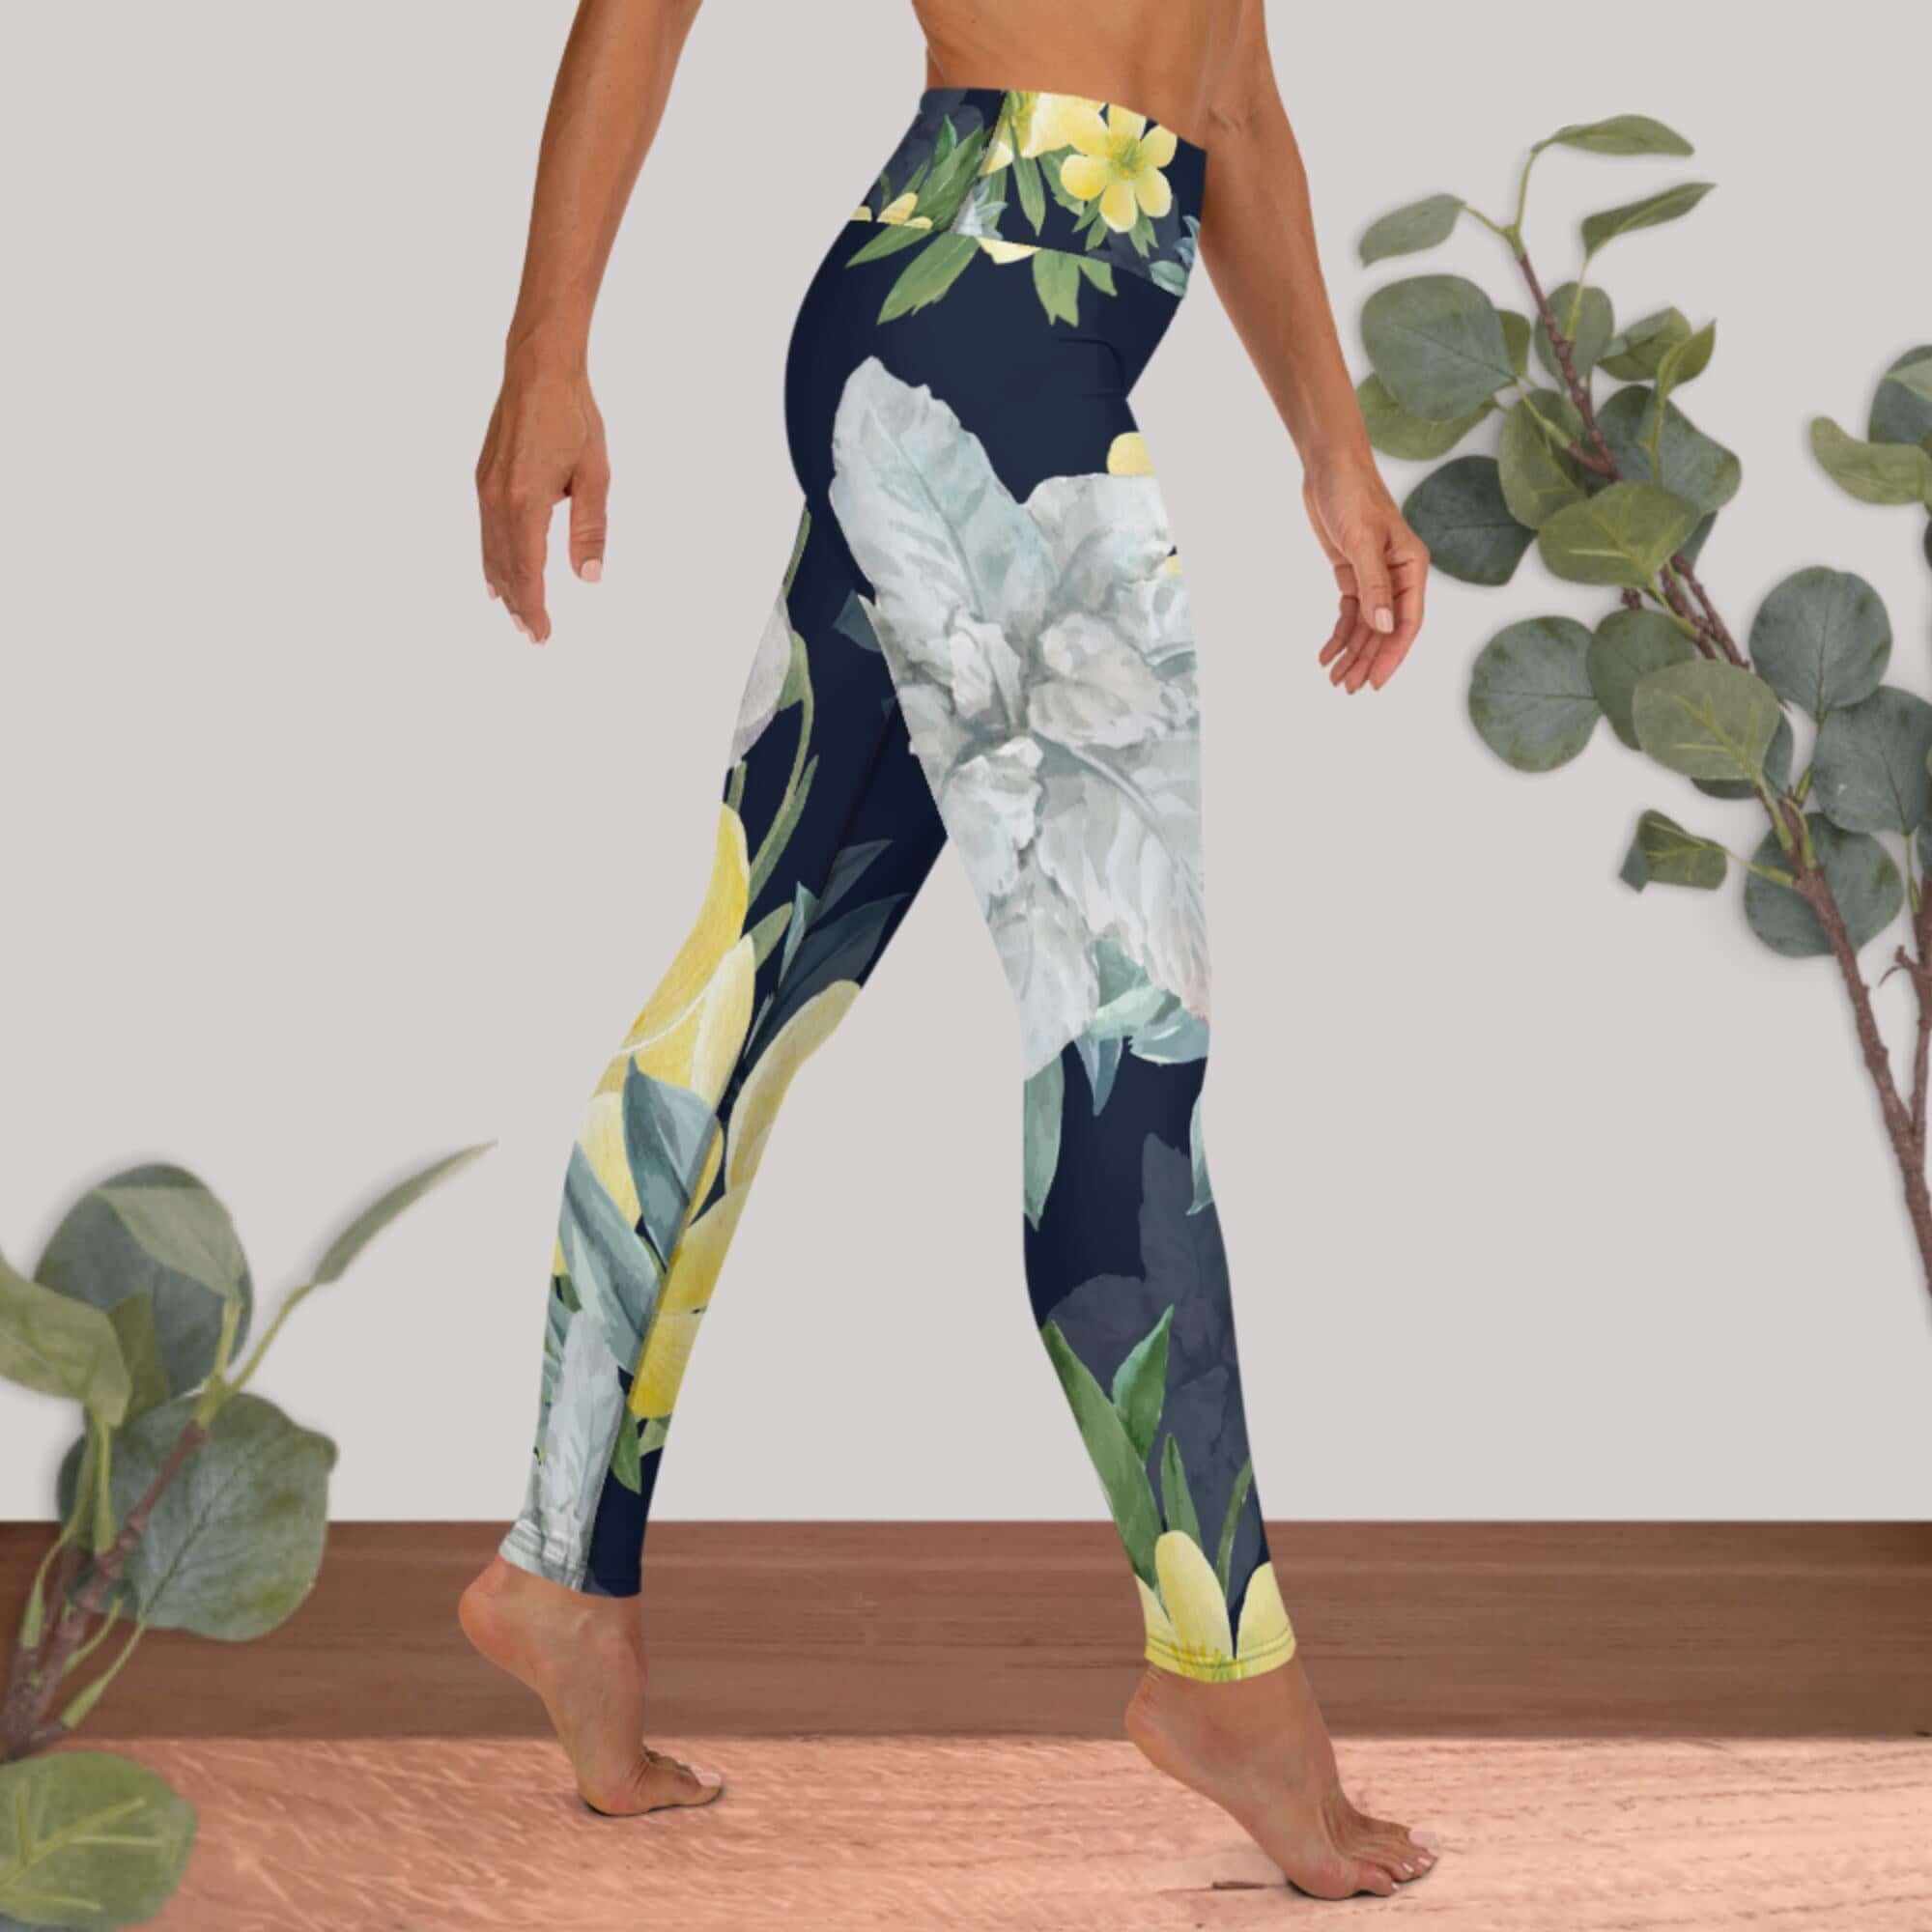 Floral Workout Leggings | Women's High Waist Leggings - Revive Wear     Our Floral Workout Leggings provides the most comfortable fit with soft fabric and four way stretch. Order your workout leggings today at Revive Wear.